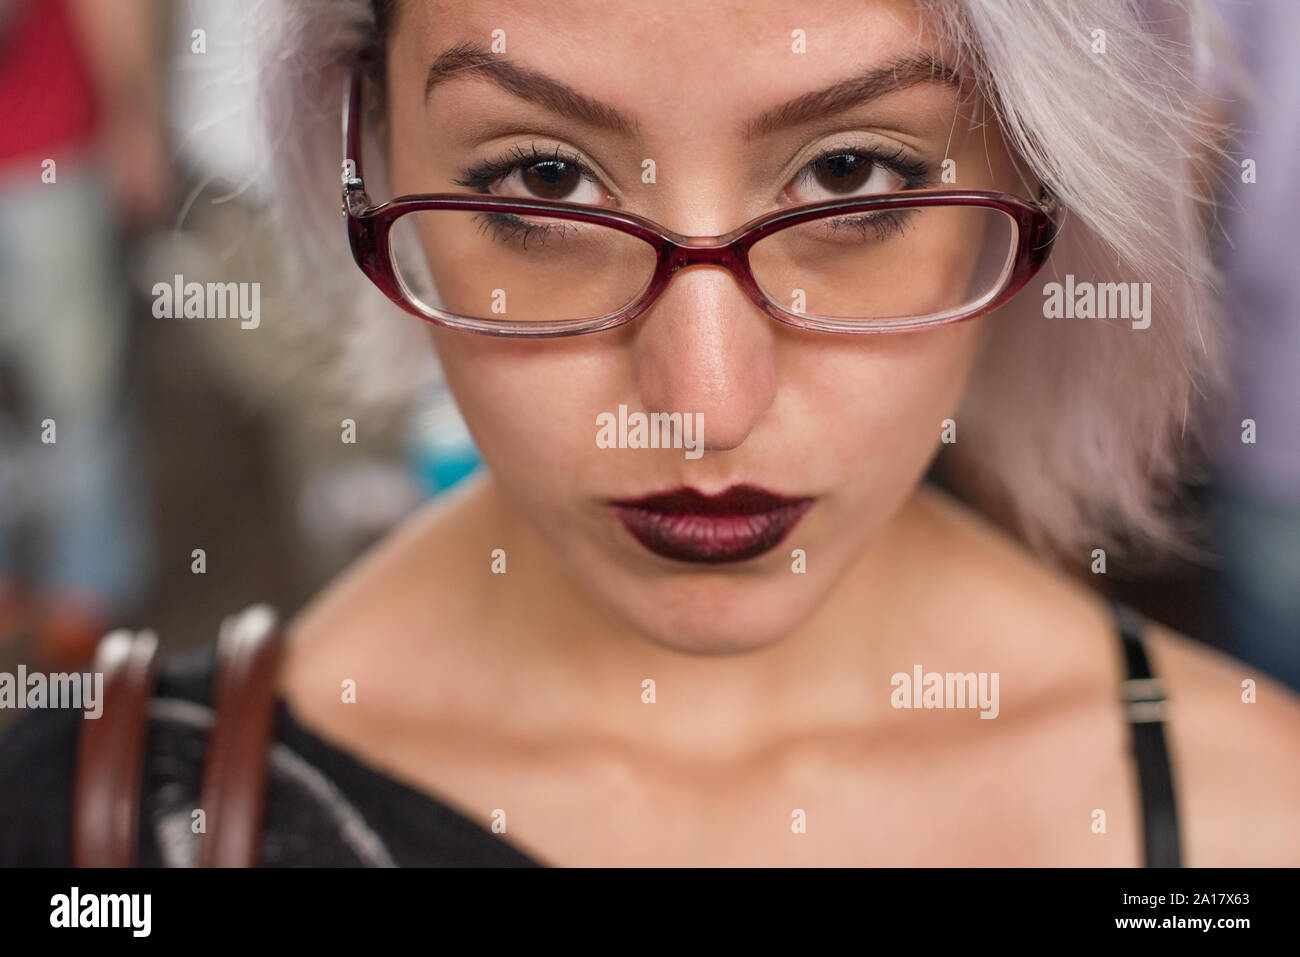 Young woman with white hair, dark red lips and glasses Stock Photo